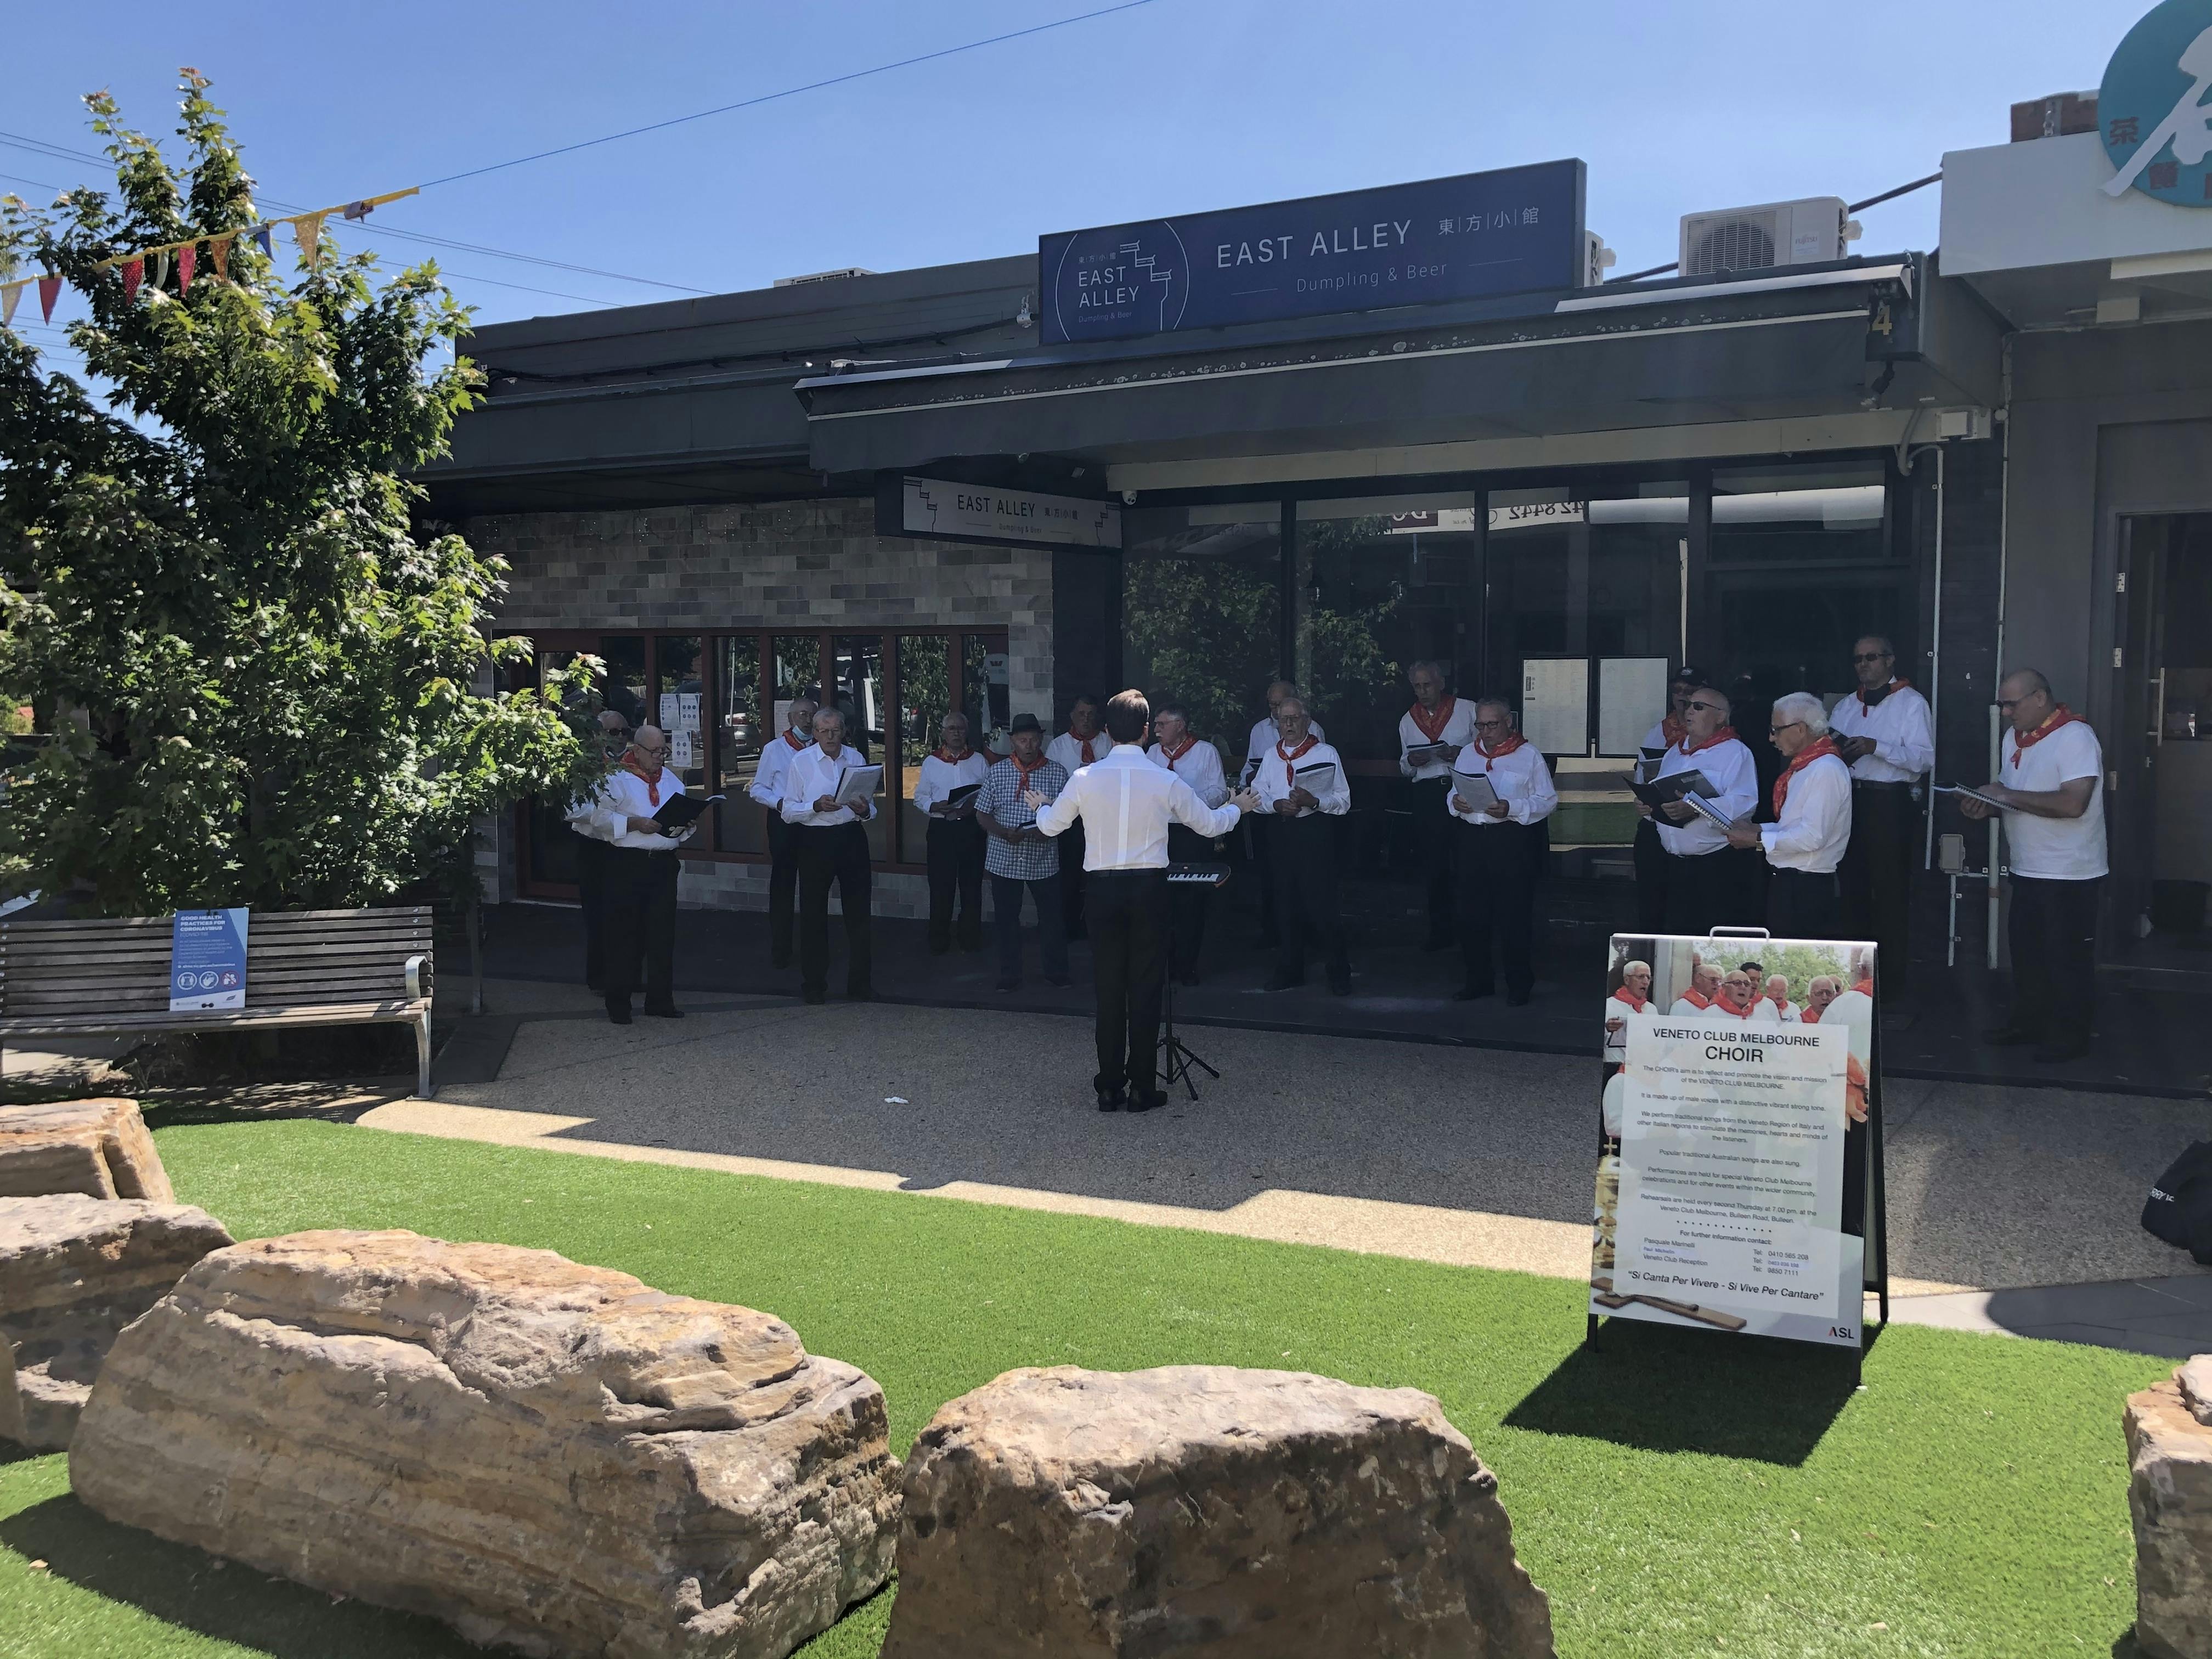 Choir in white shirts singing at Tunstall Square